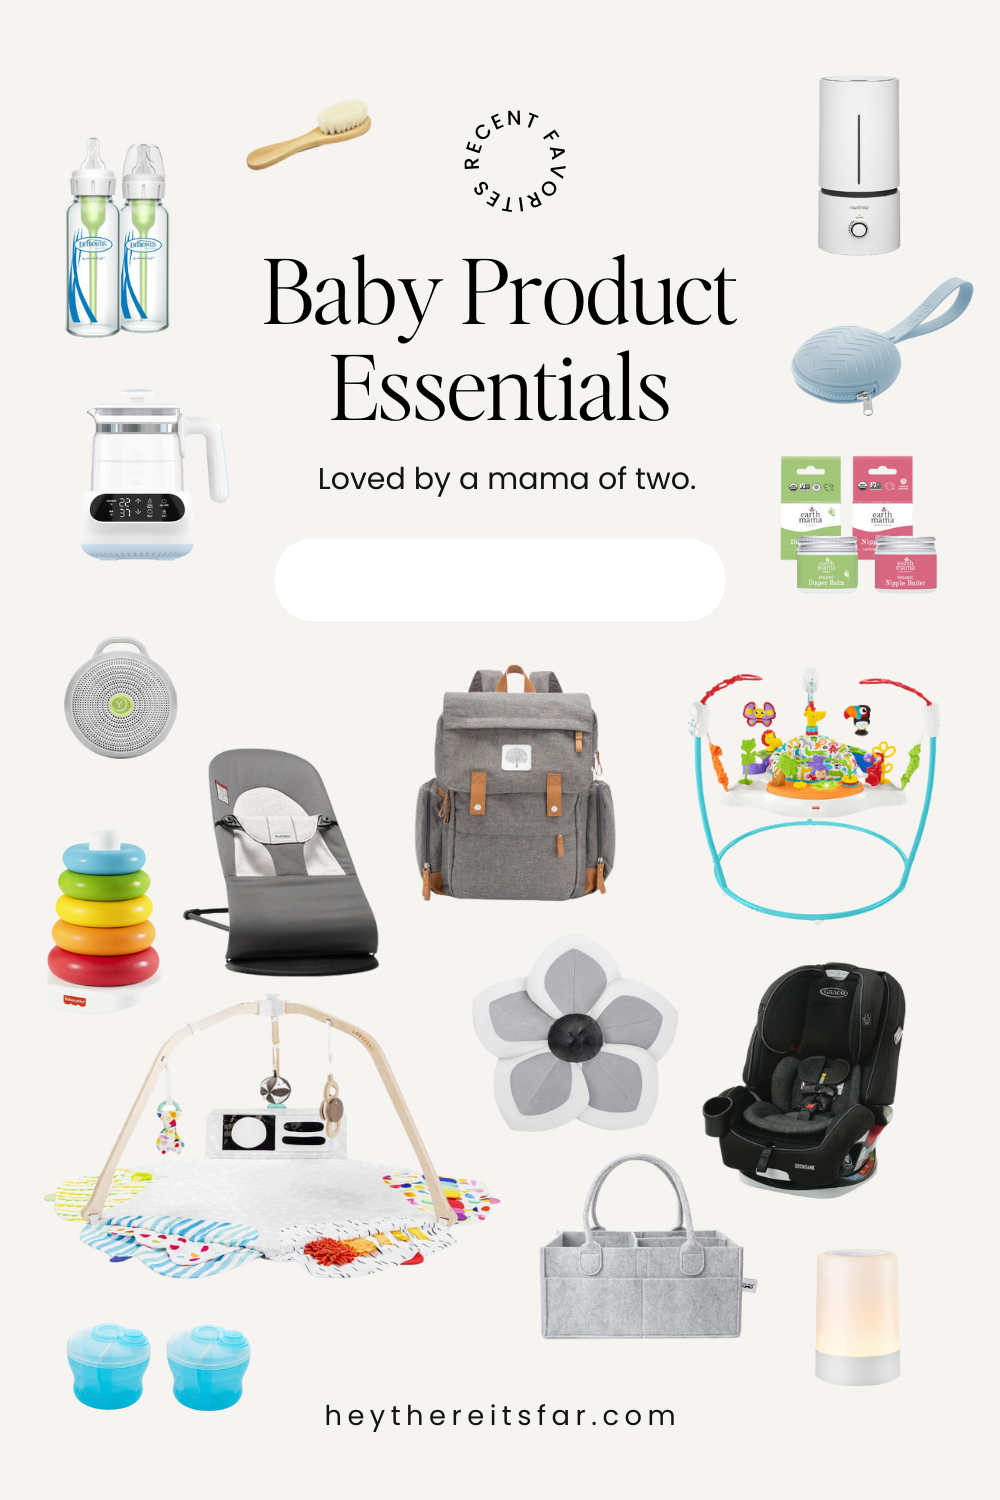 Must have baby essentials product list.